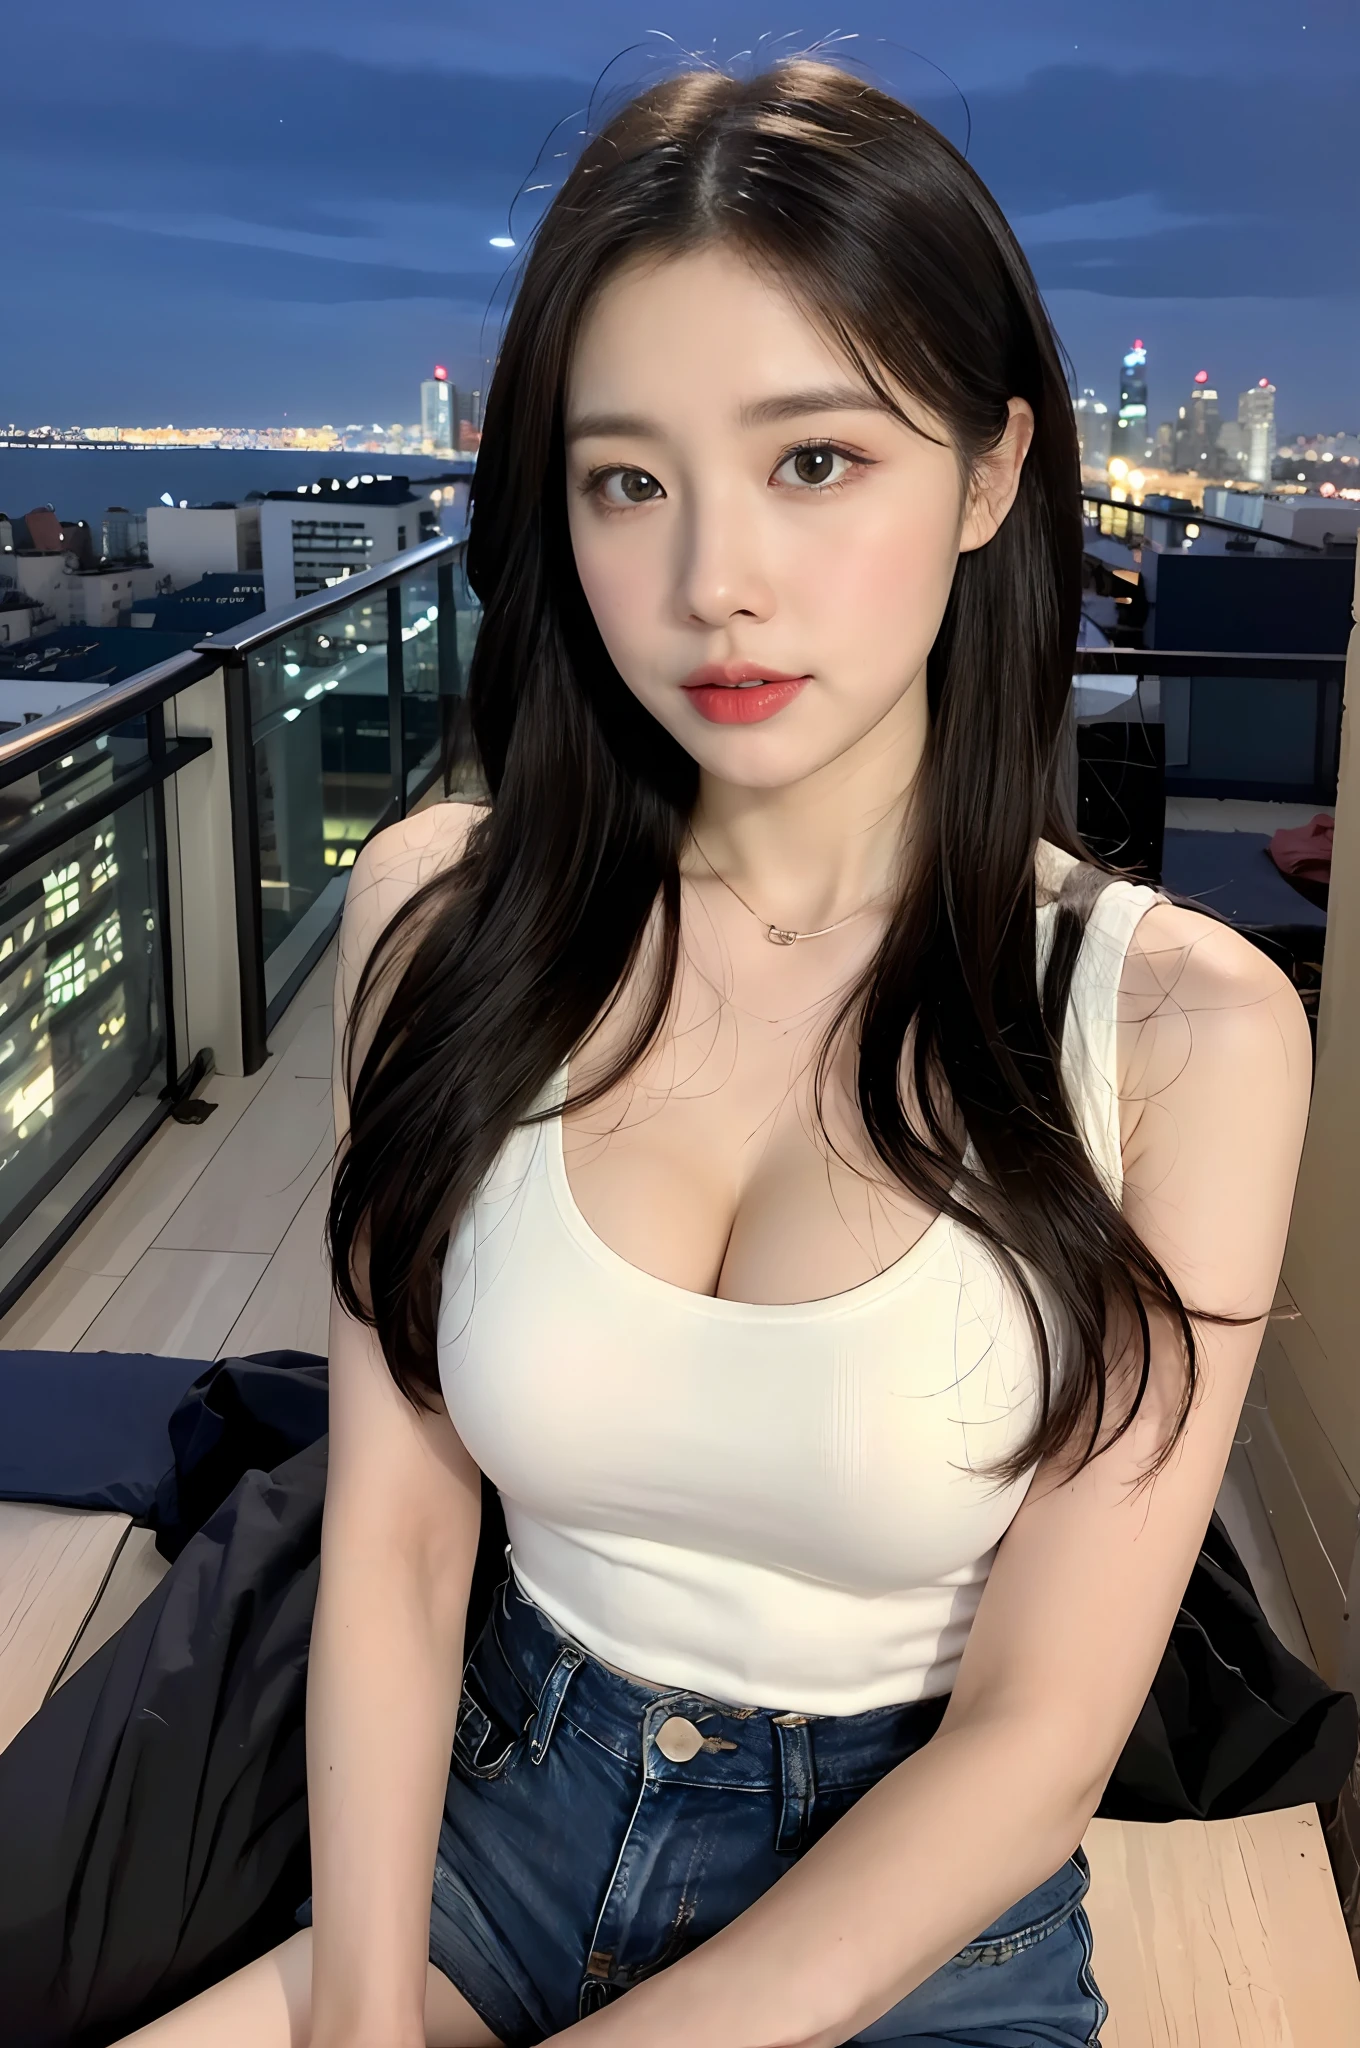 ((Midnight, Best quality, 8k, Masterpiece :1.3)), (realistic, photo-realistic:1.37), (ultra high res:1.2),(RAW photo:1.2), (sharp focus:1.3), (face focus:1.2), full body, (A extremely cute and pretty woman with perfect figure :1.4), (Slender abs :1.1), ((chestnut wavy hair:1.2)), ((Large breasts :1.25)), (White tight sleeveless turtle shirt:1.3), (denim shorts:1.3), Standing, ((Night city view, Rooftop:1.3)), Highly detailed face and skin texture, Detailed eyes, Double eyelid, (pale skin:1.3), bokeh, depth of field, looking straight the viewer,